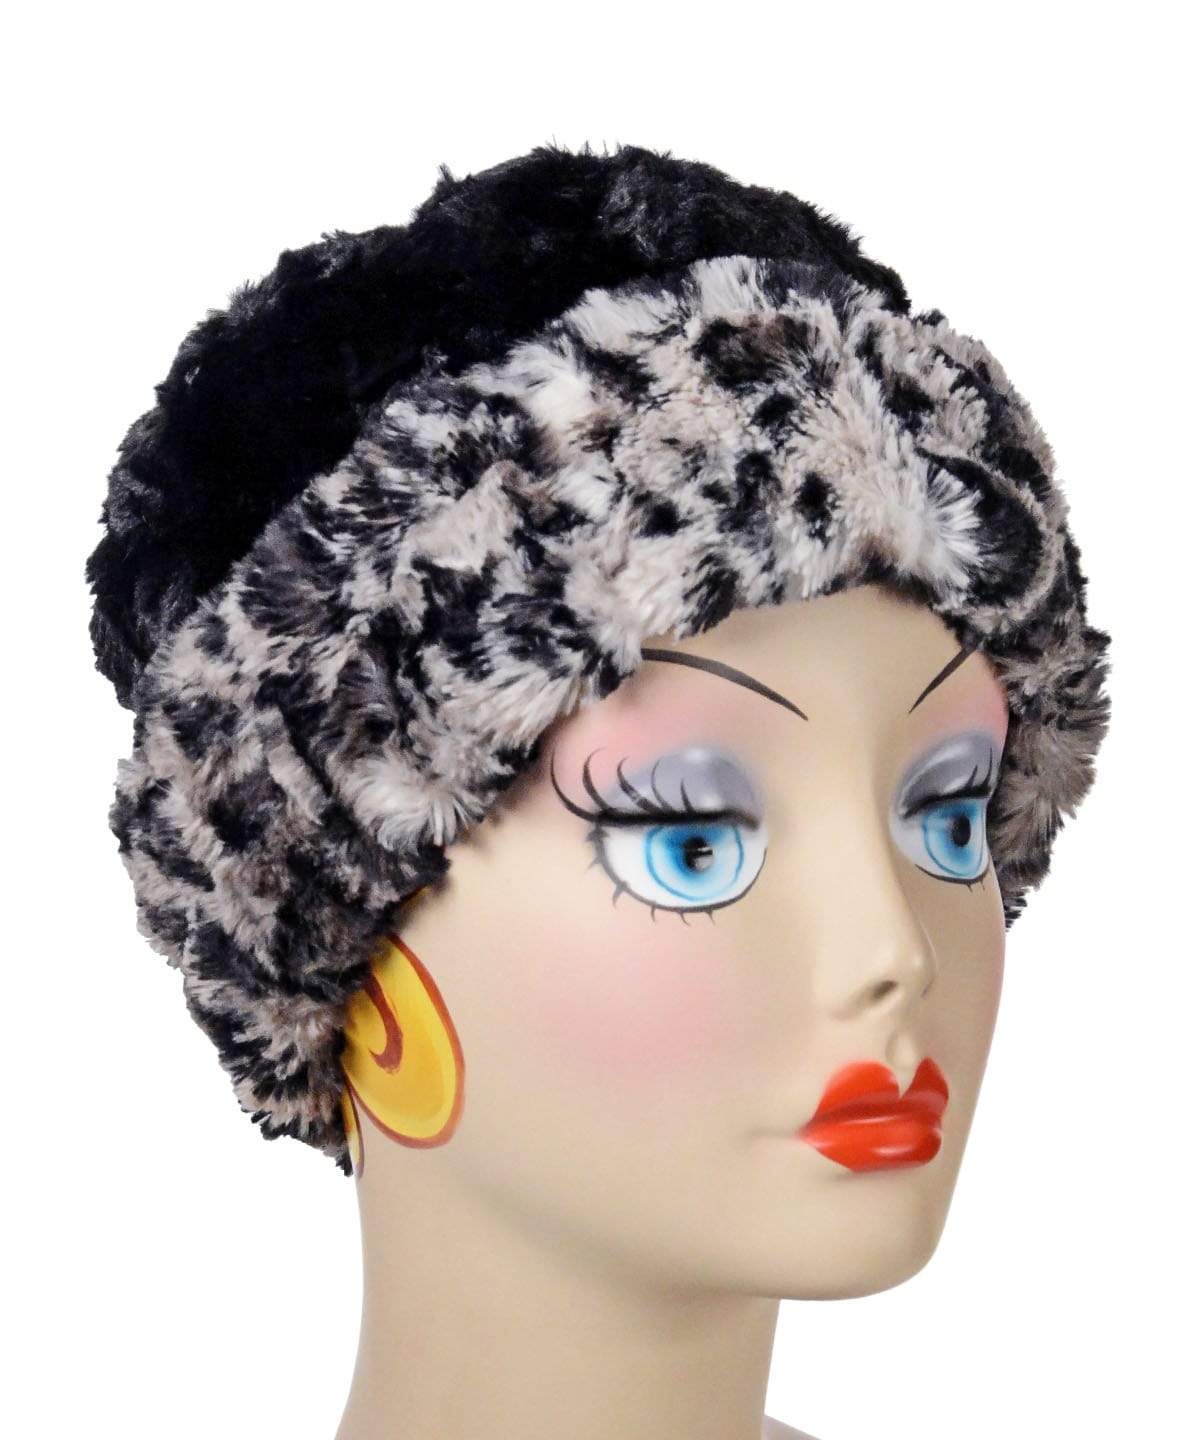 Hat on mannequin | Cuffed Pillbox two-tone  in Savannah Cat and Cuddly Black Faux Fur | Handmade USA Pandemonium Seattle